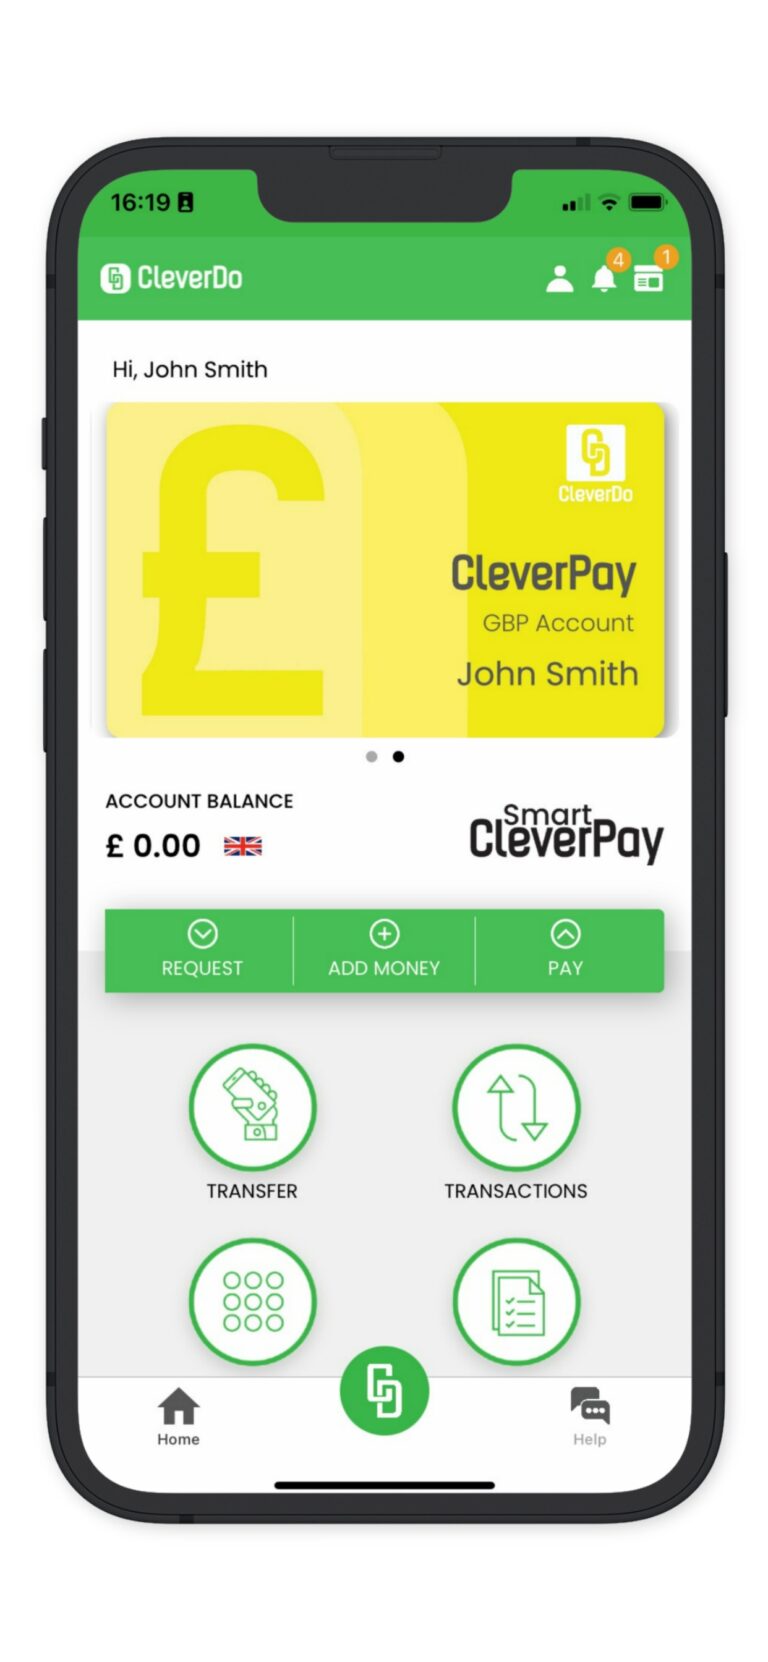 CleverDo GBP account now available.